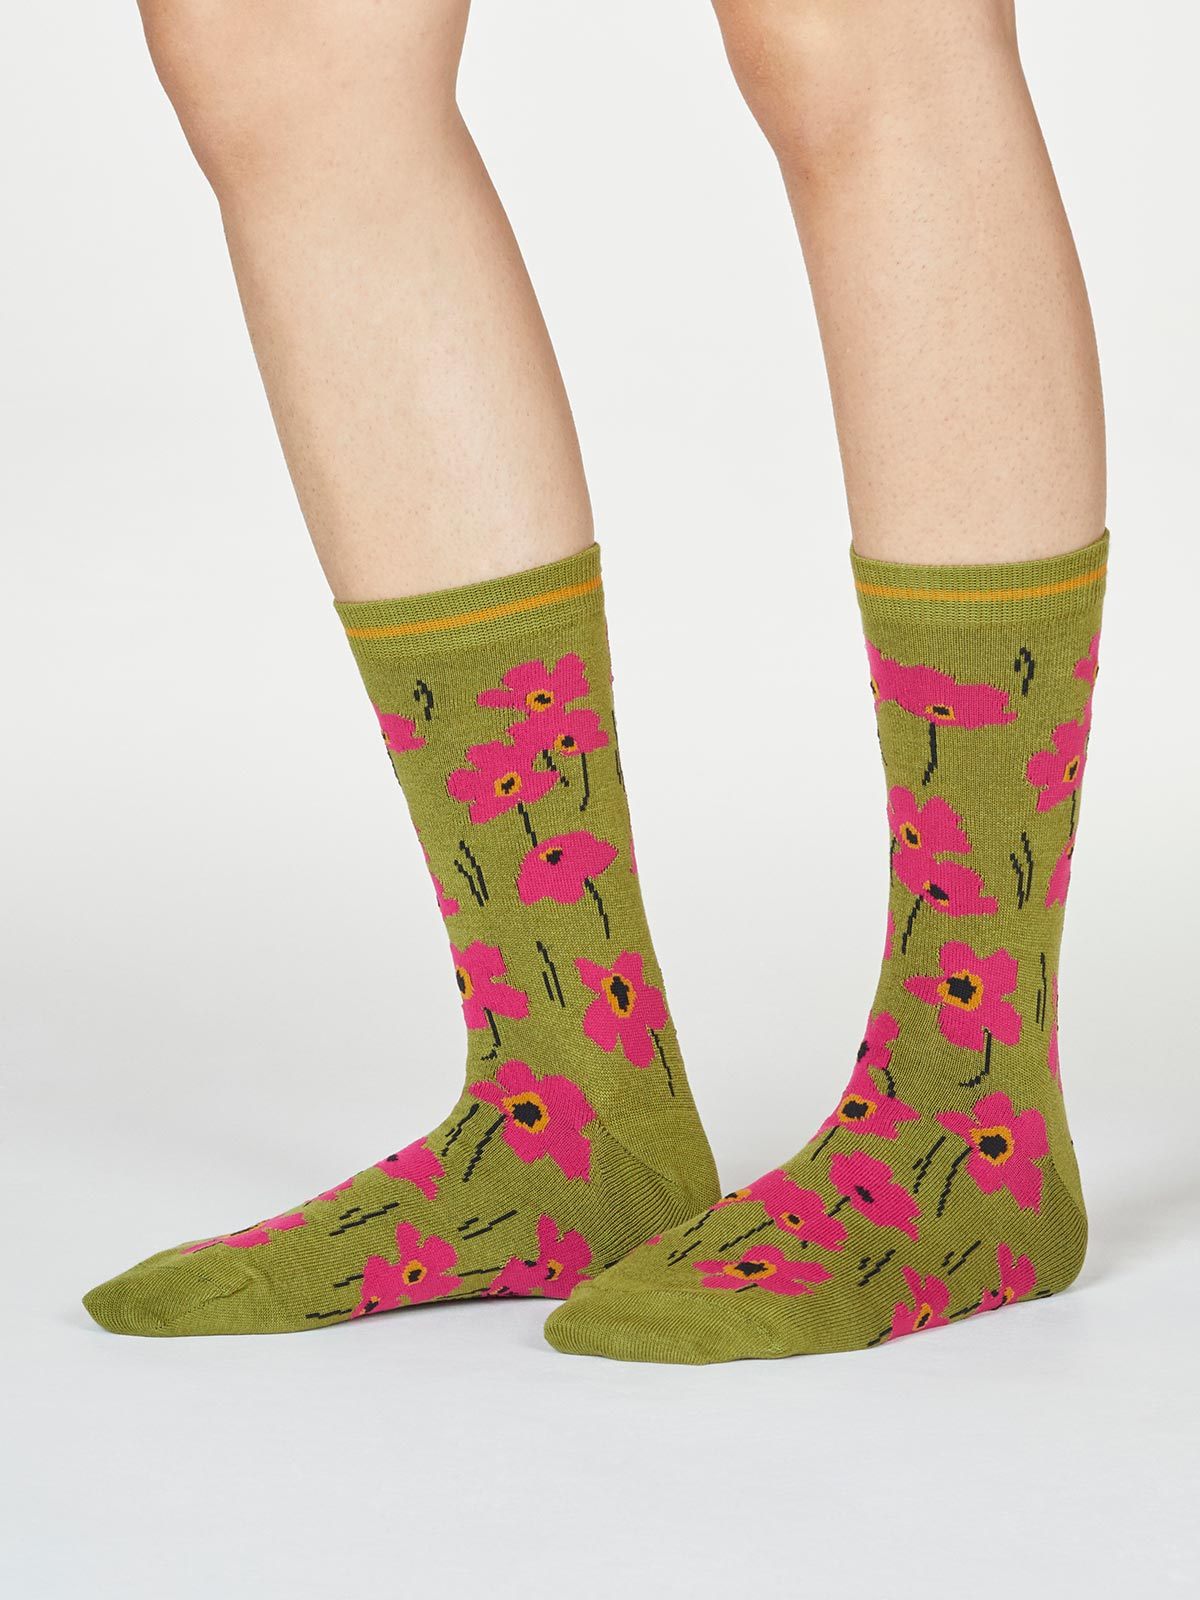 Olive Green Floral Socks Organic Cotton & Bamboo Pair